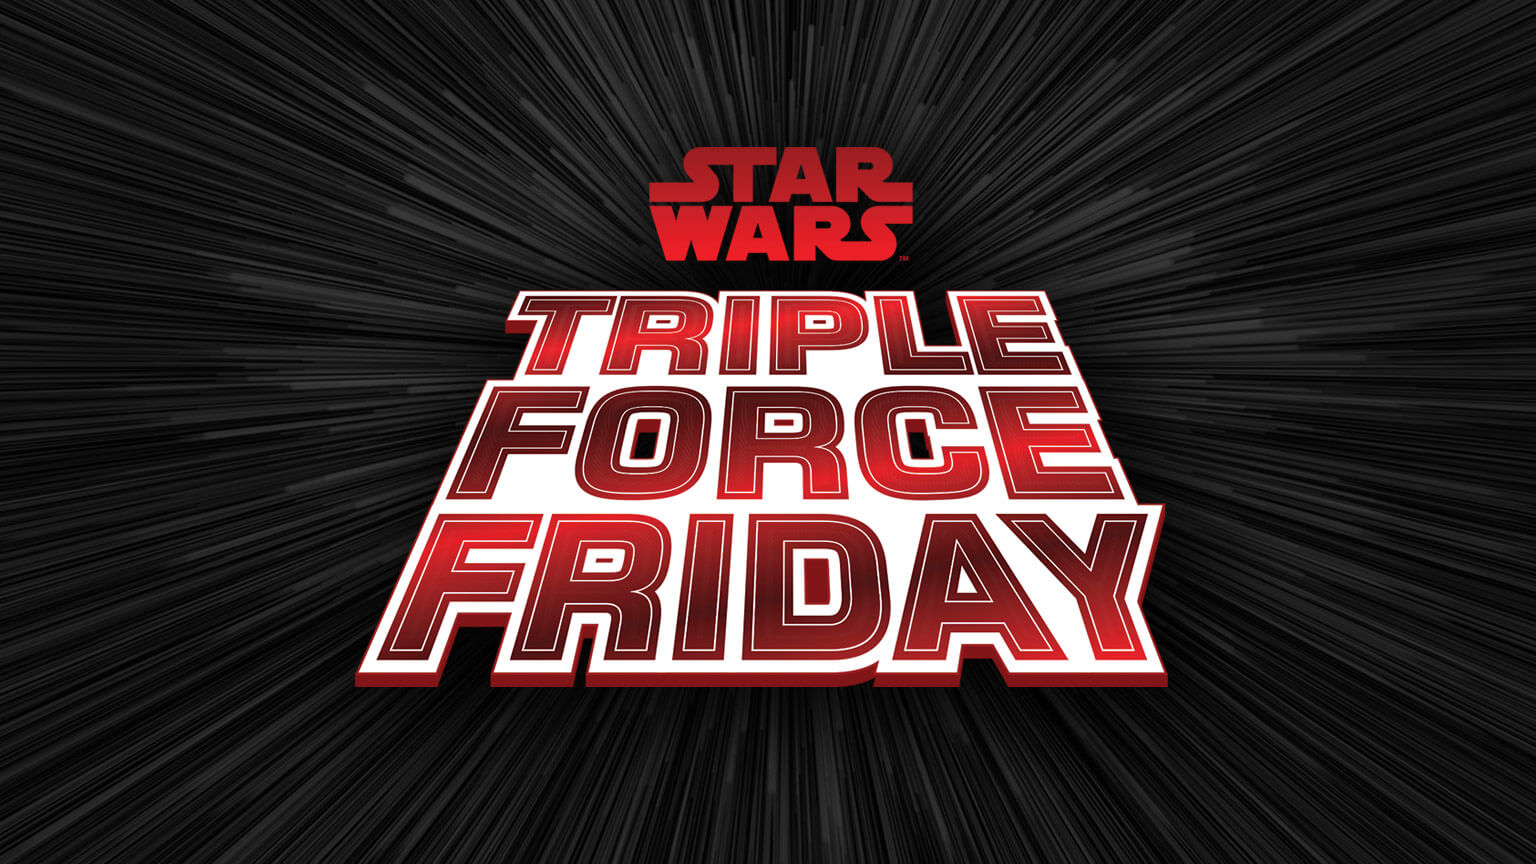 Star Wars Triple Force Friday Livestream Announced